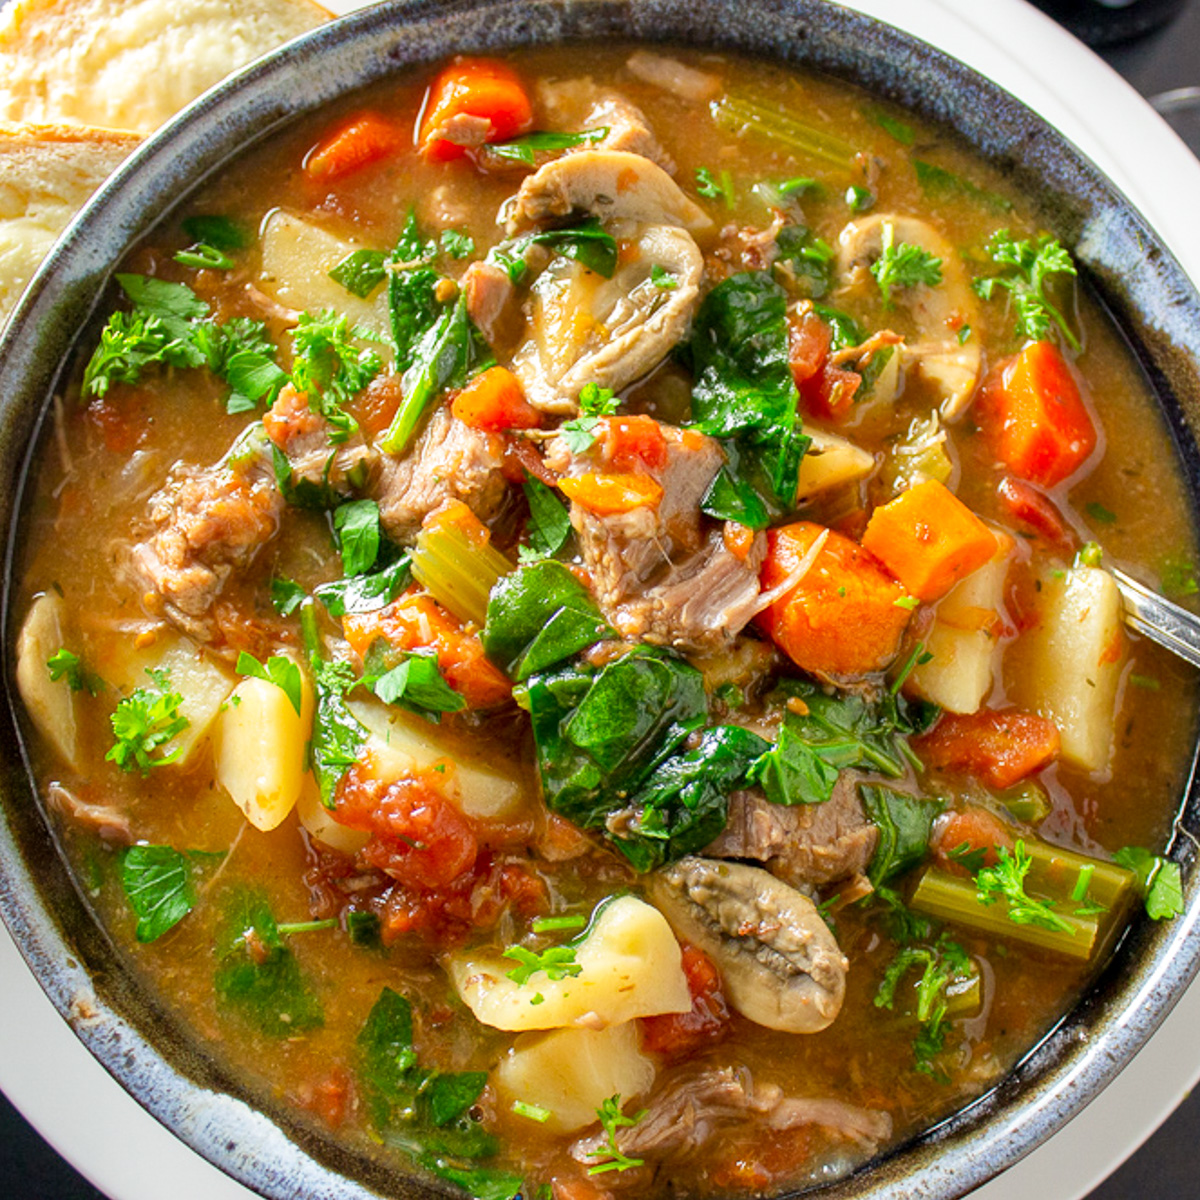 bowl of veal stew